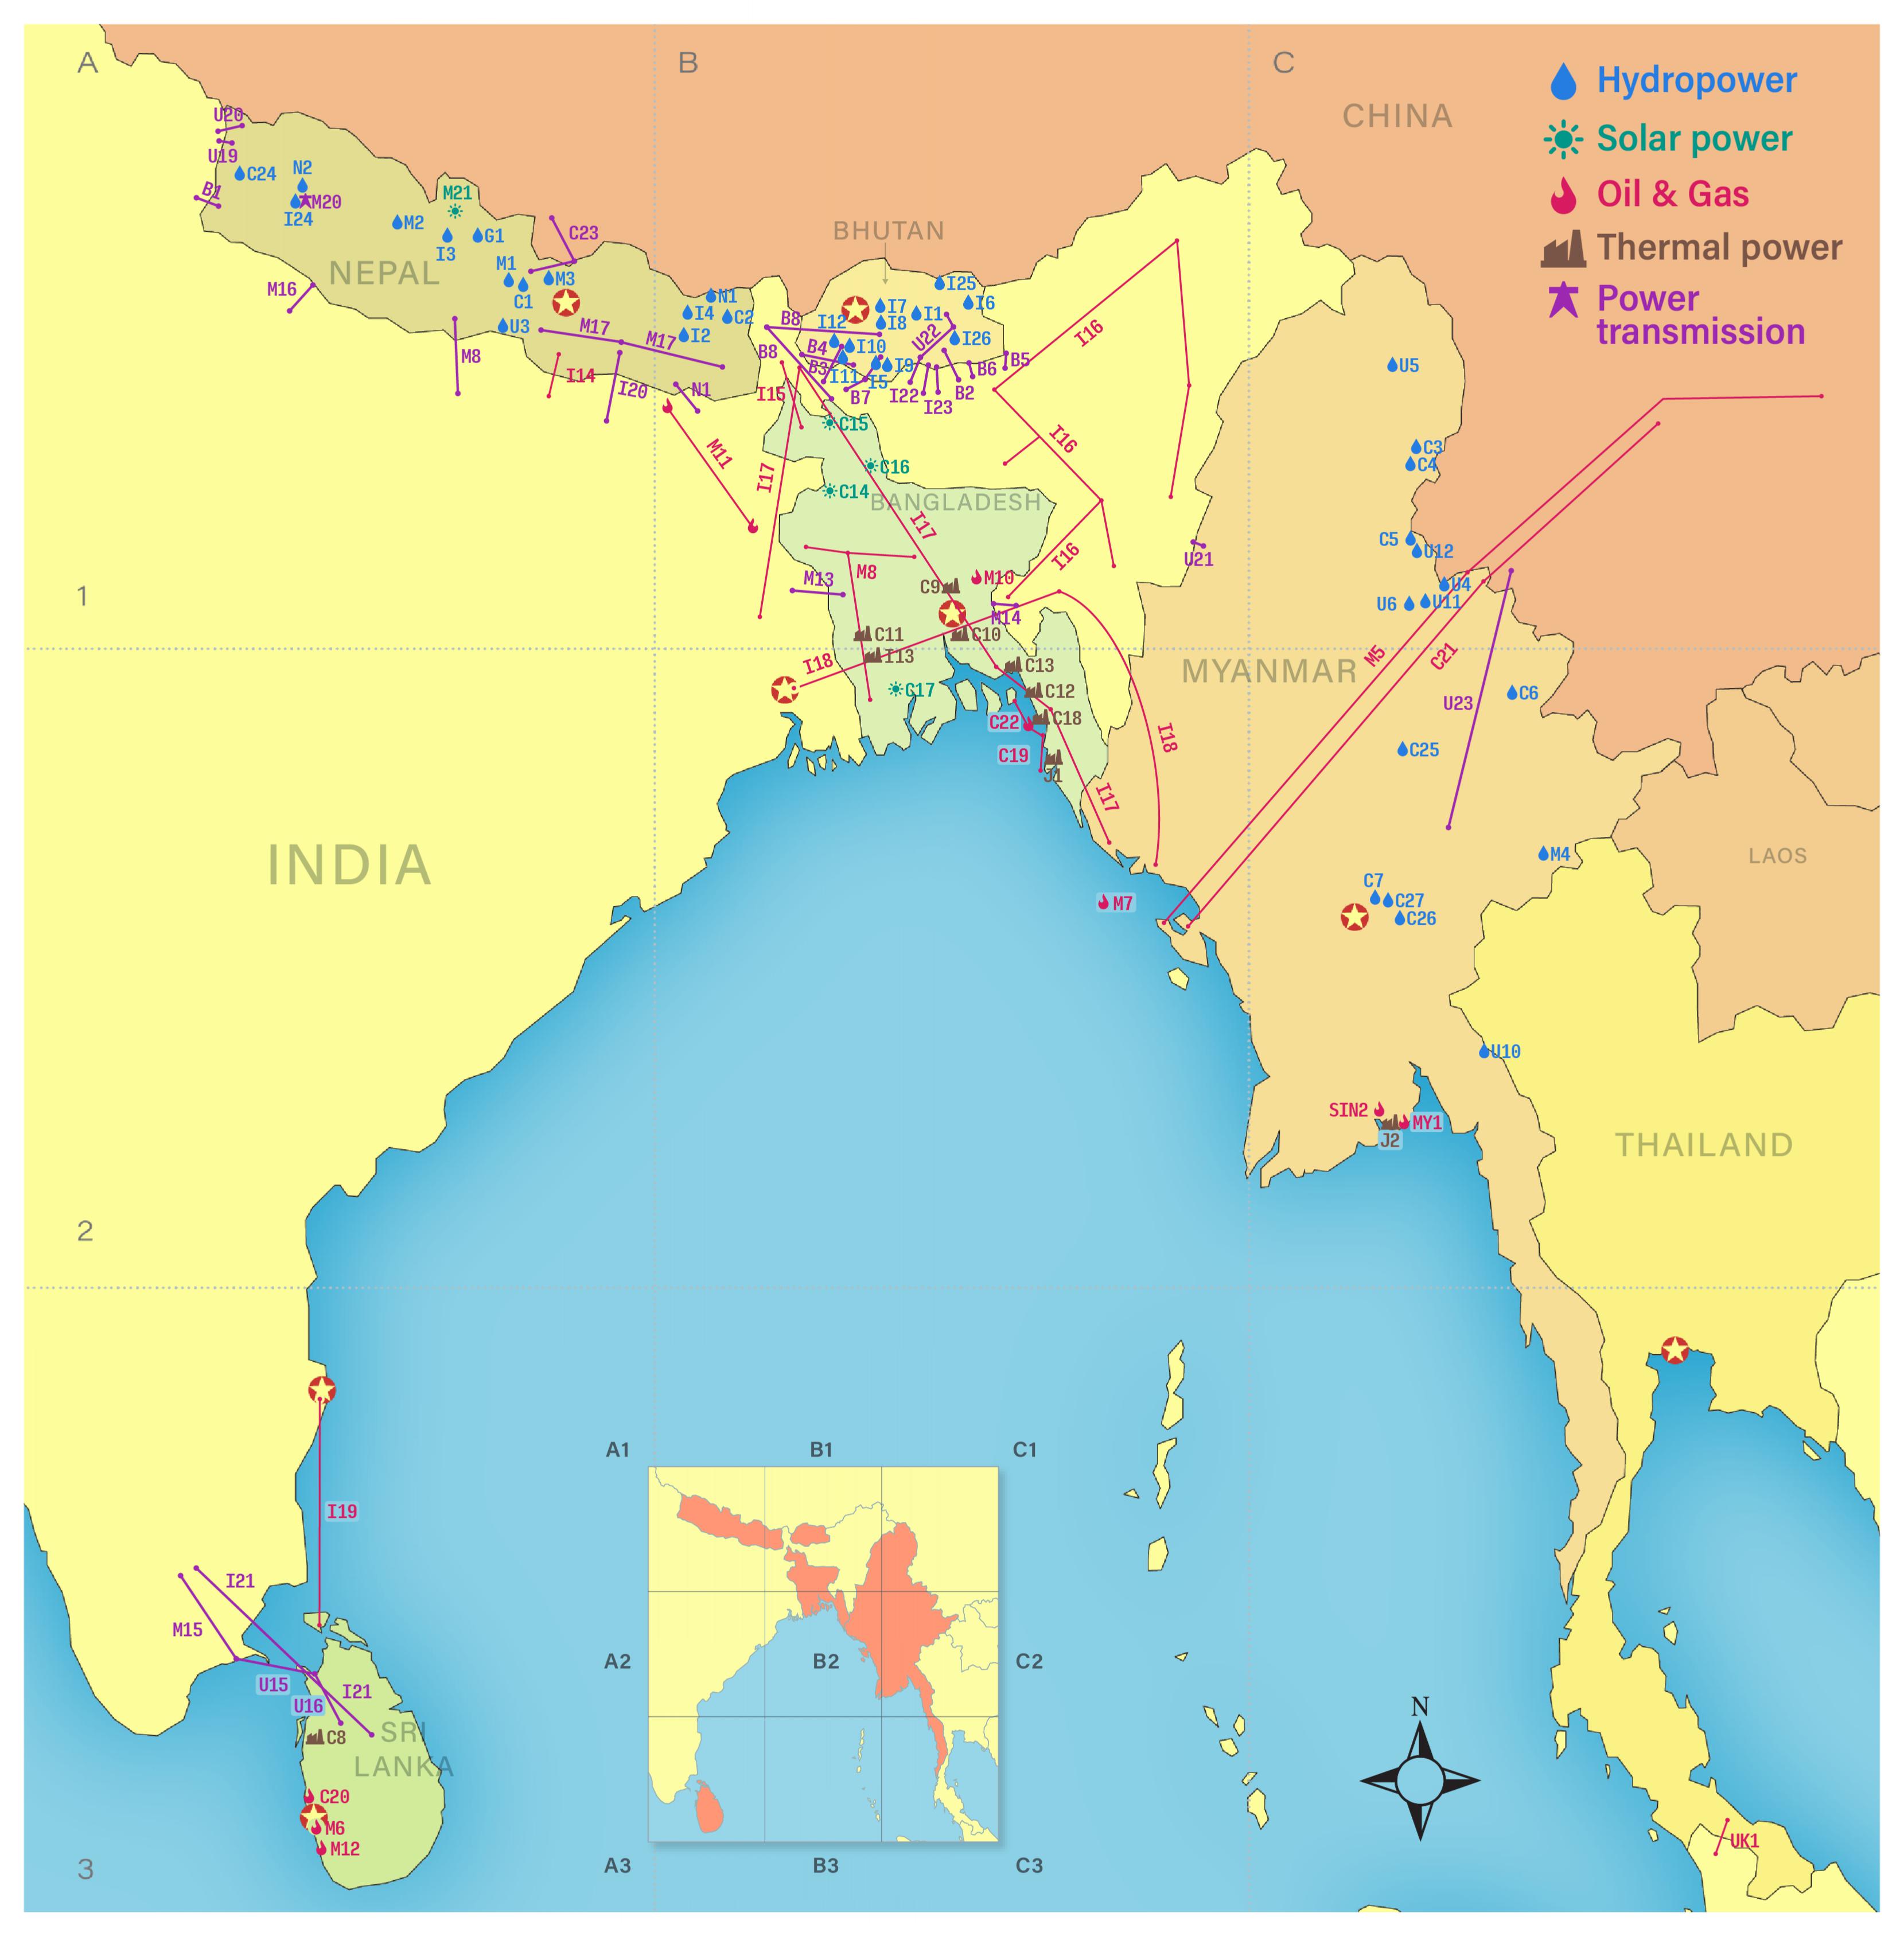 Energy Connectivity in the Bay of Bengal